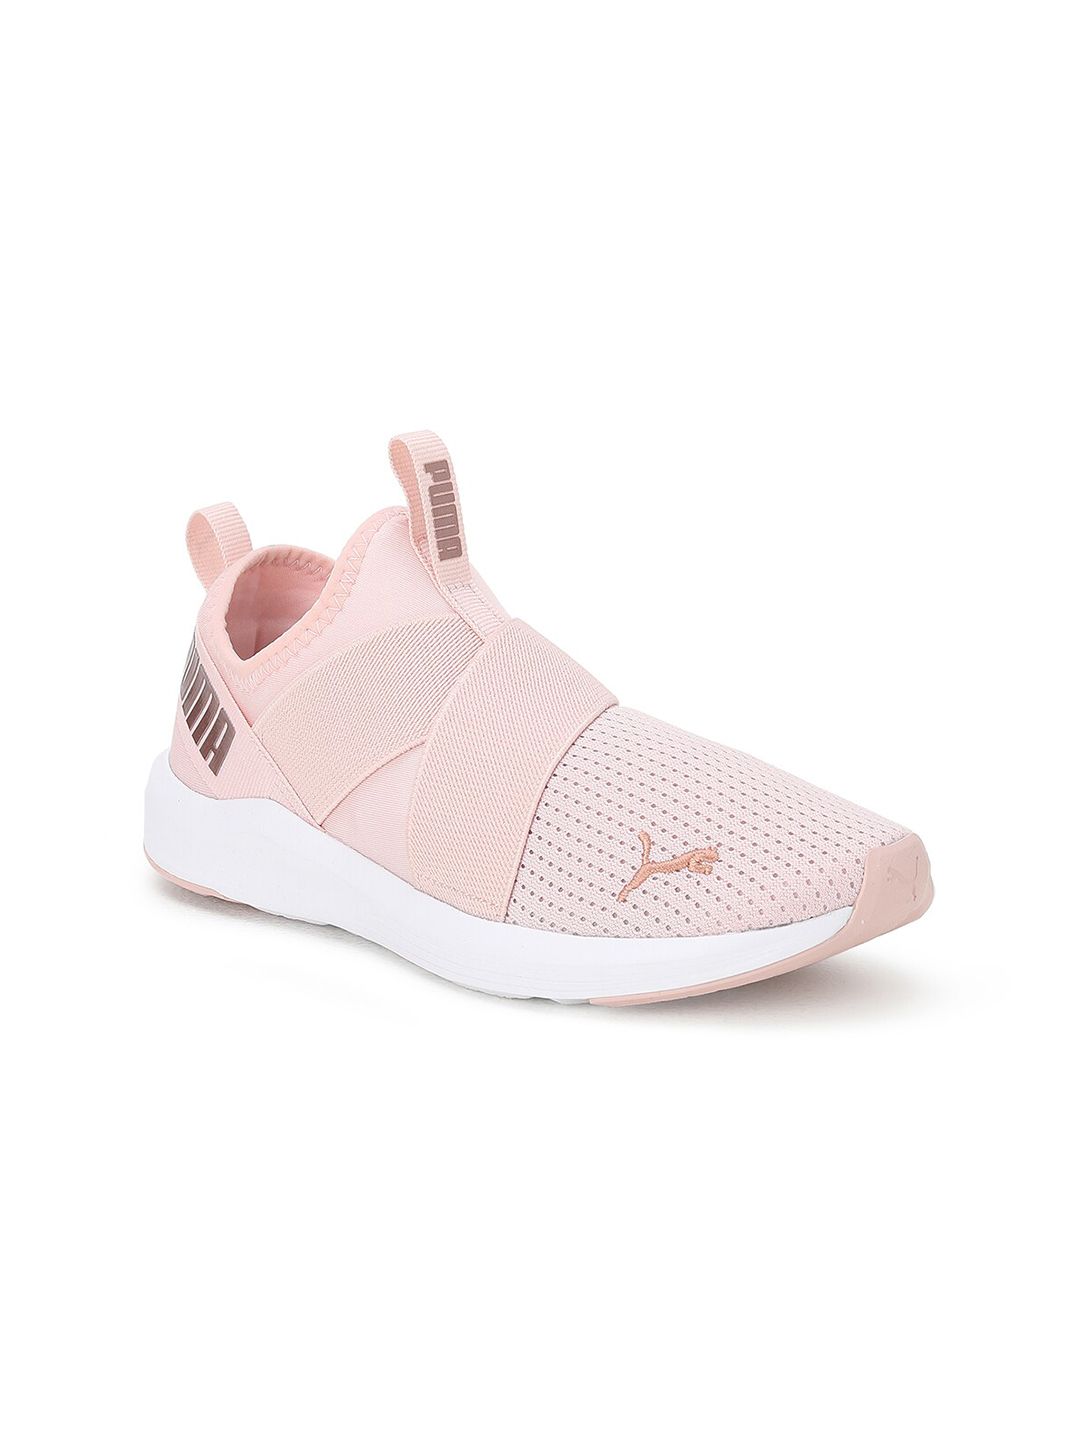 Puma Women Pink Textile Training or Gym Shoes Price in India